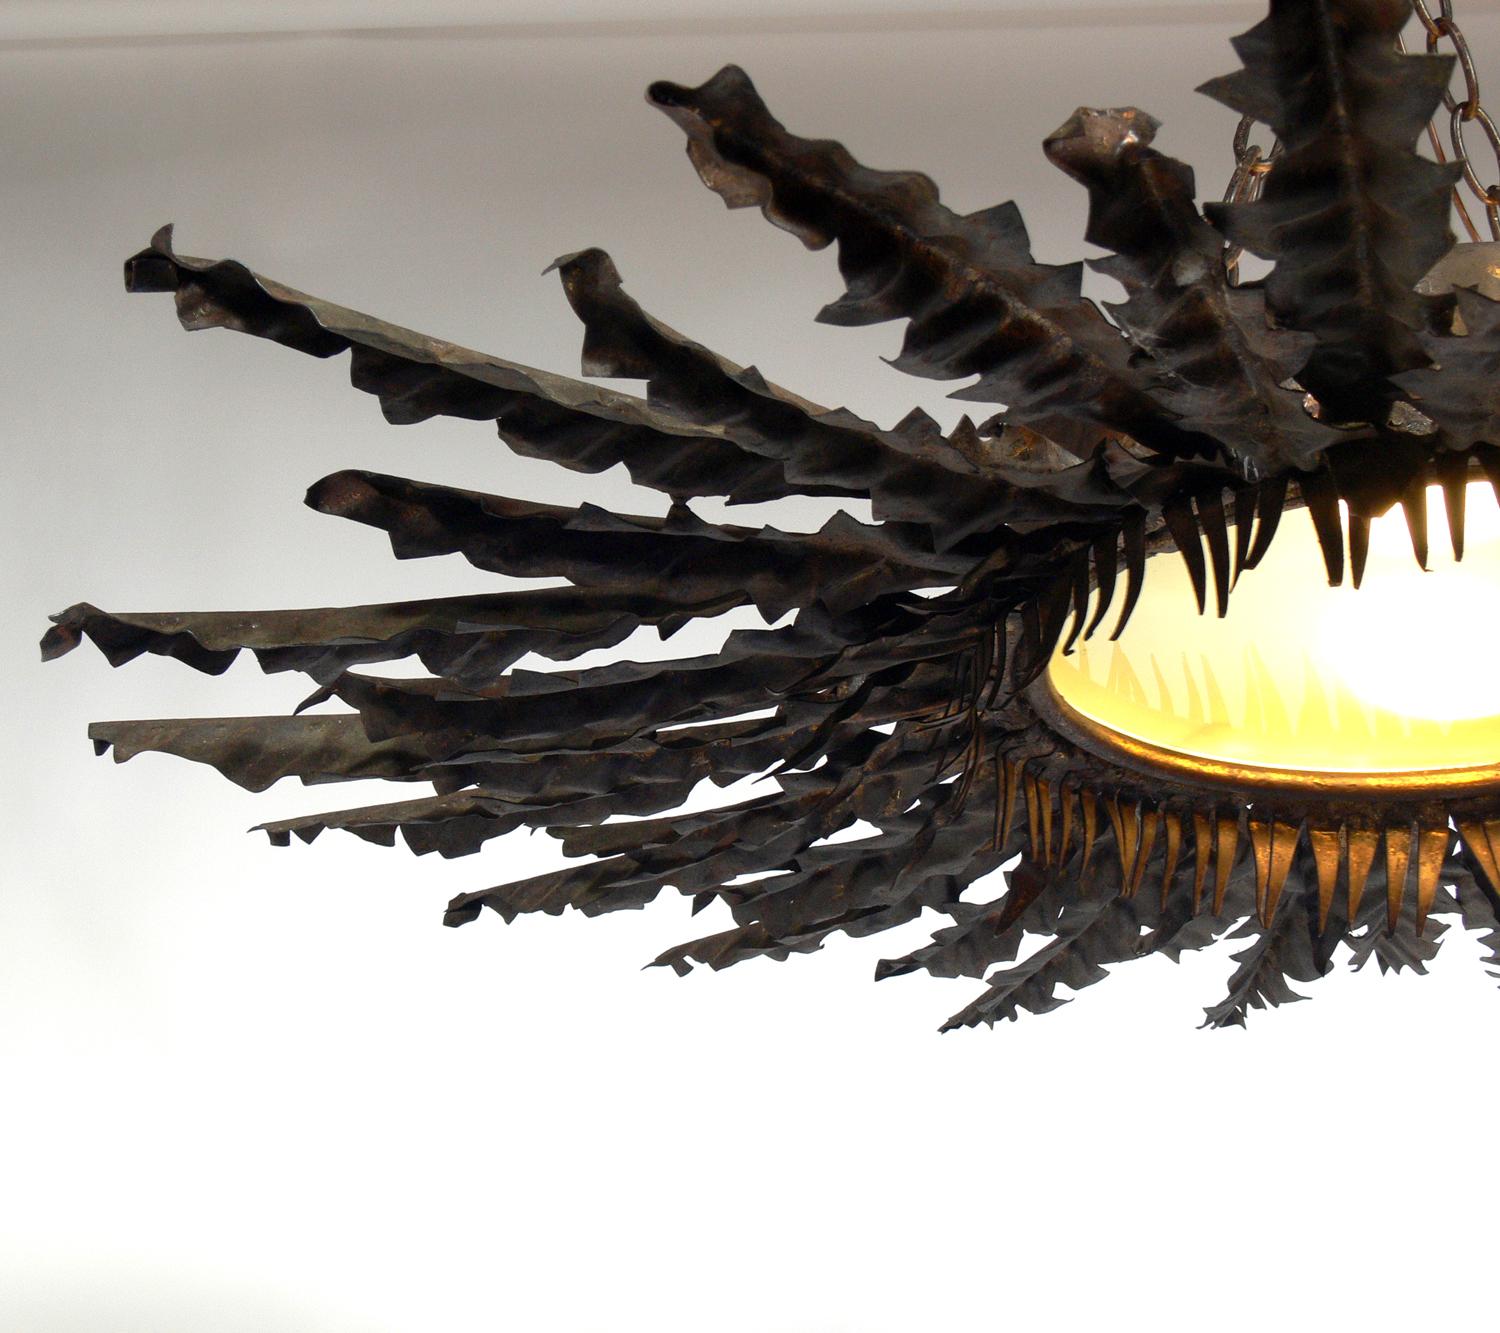 French starburst chandelier, France, circa 1930s. It is constructed of patinated metal, probably copper, but has taken on a bronze color patina, and frosted glass. It has been rewired and is ready to mount.